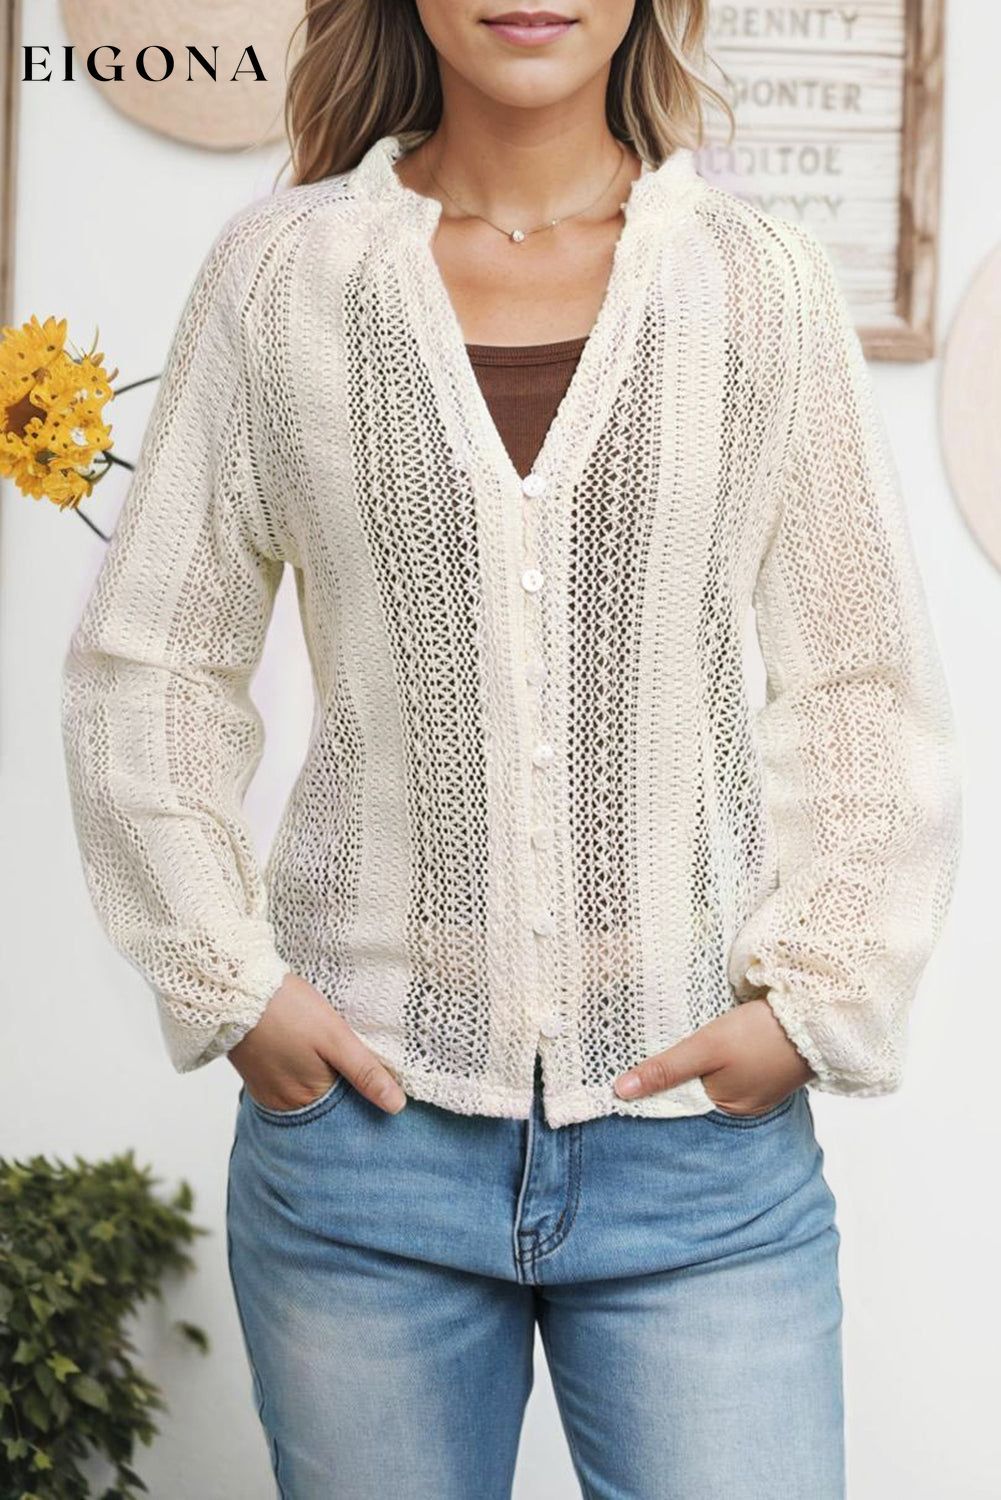 White V-Neck Long Sleeve Button Up Lace Shirt All In Stock Best Sellers clothes Early Fall Collection EDM Monthly Recomend Fabric Lace long sleeve shirt long sleeve shirts Occasion Daily Print Solid Color Season Spring shirt shirts Style Elegant top tops